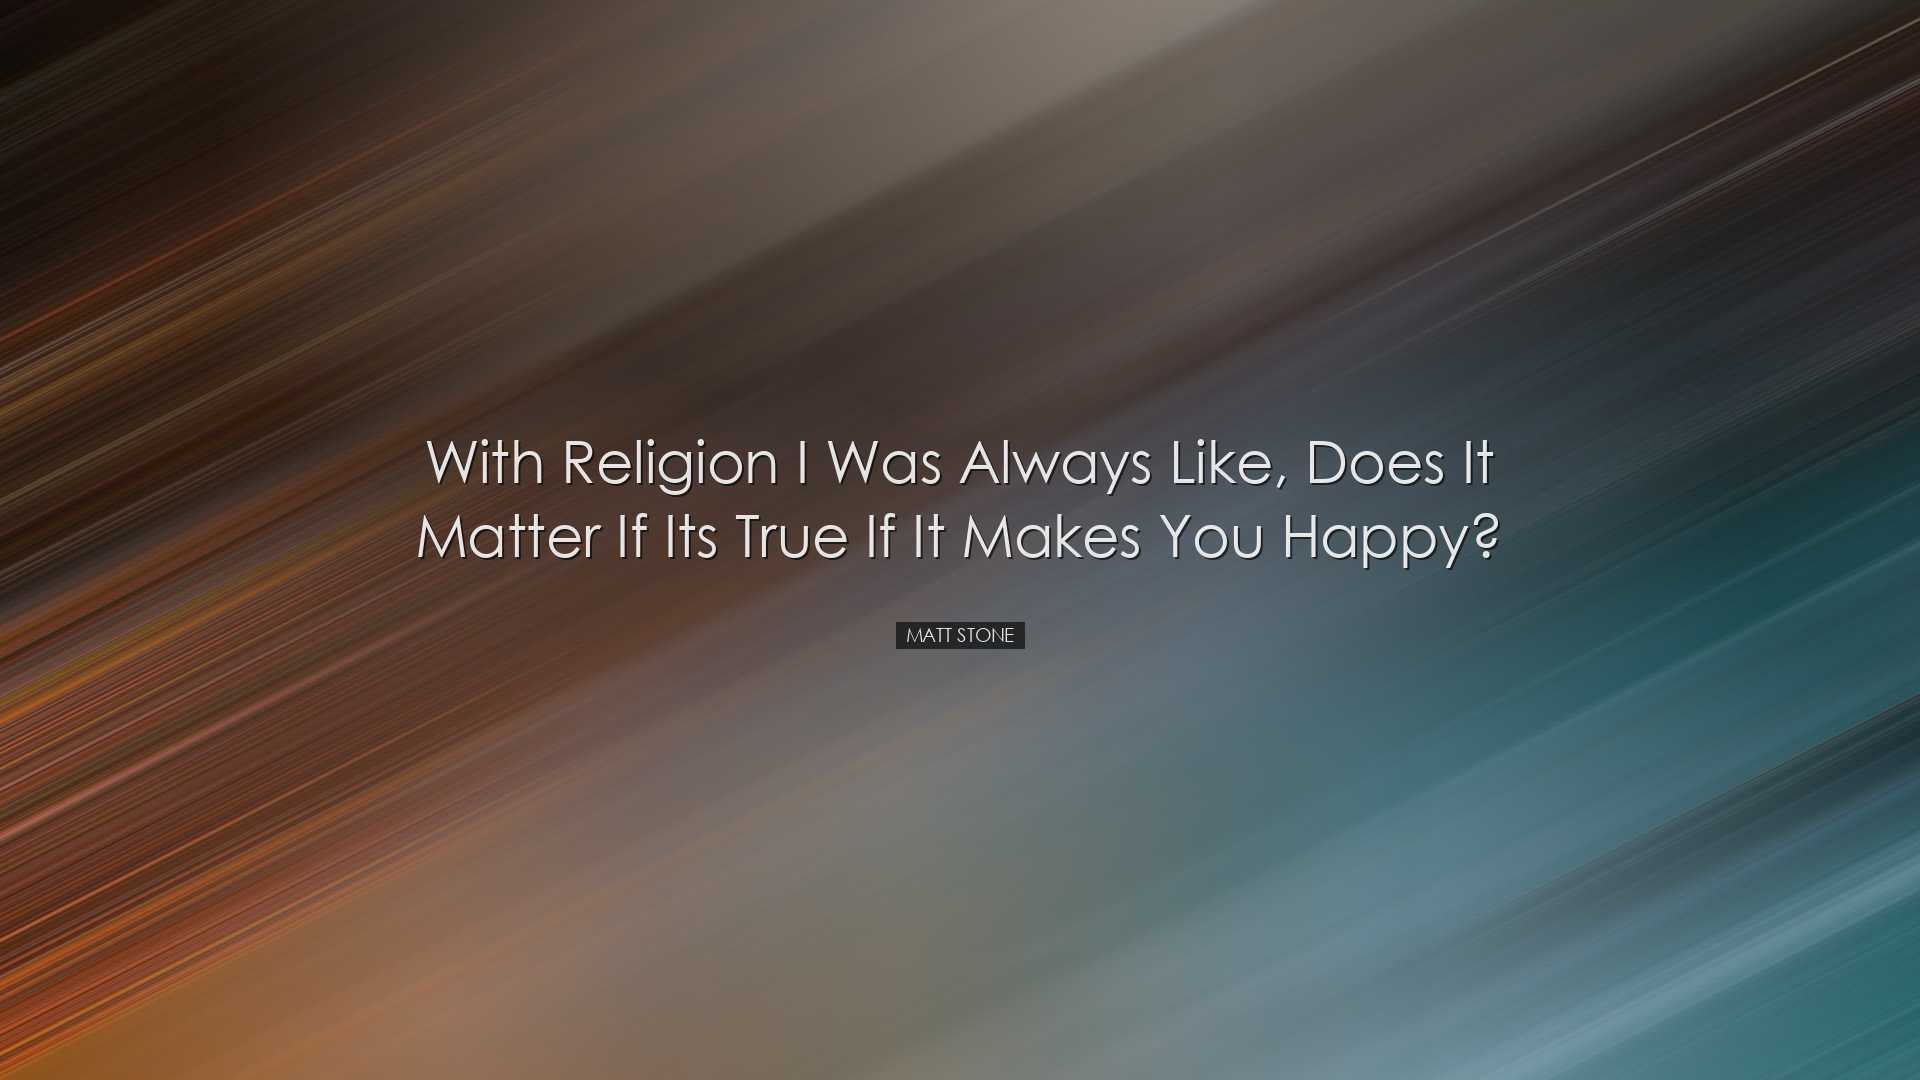 With religion I was always like, Does it matter if its true if it